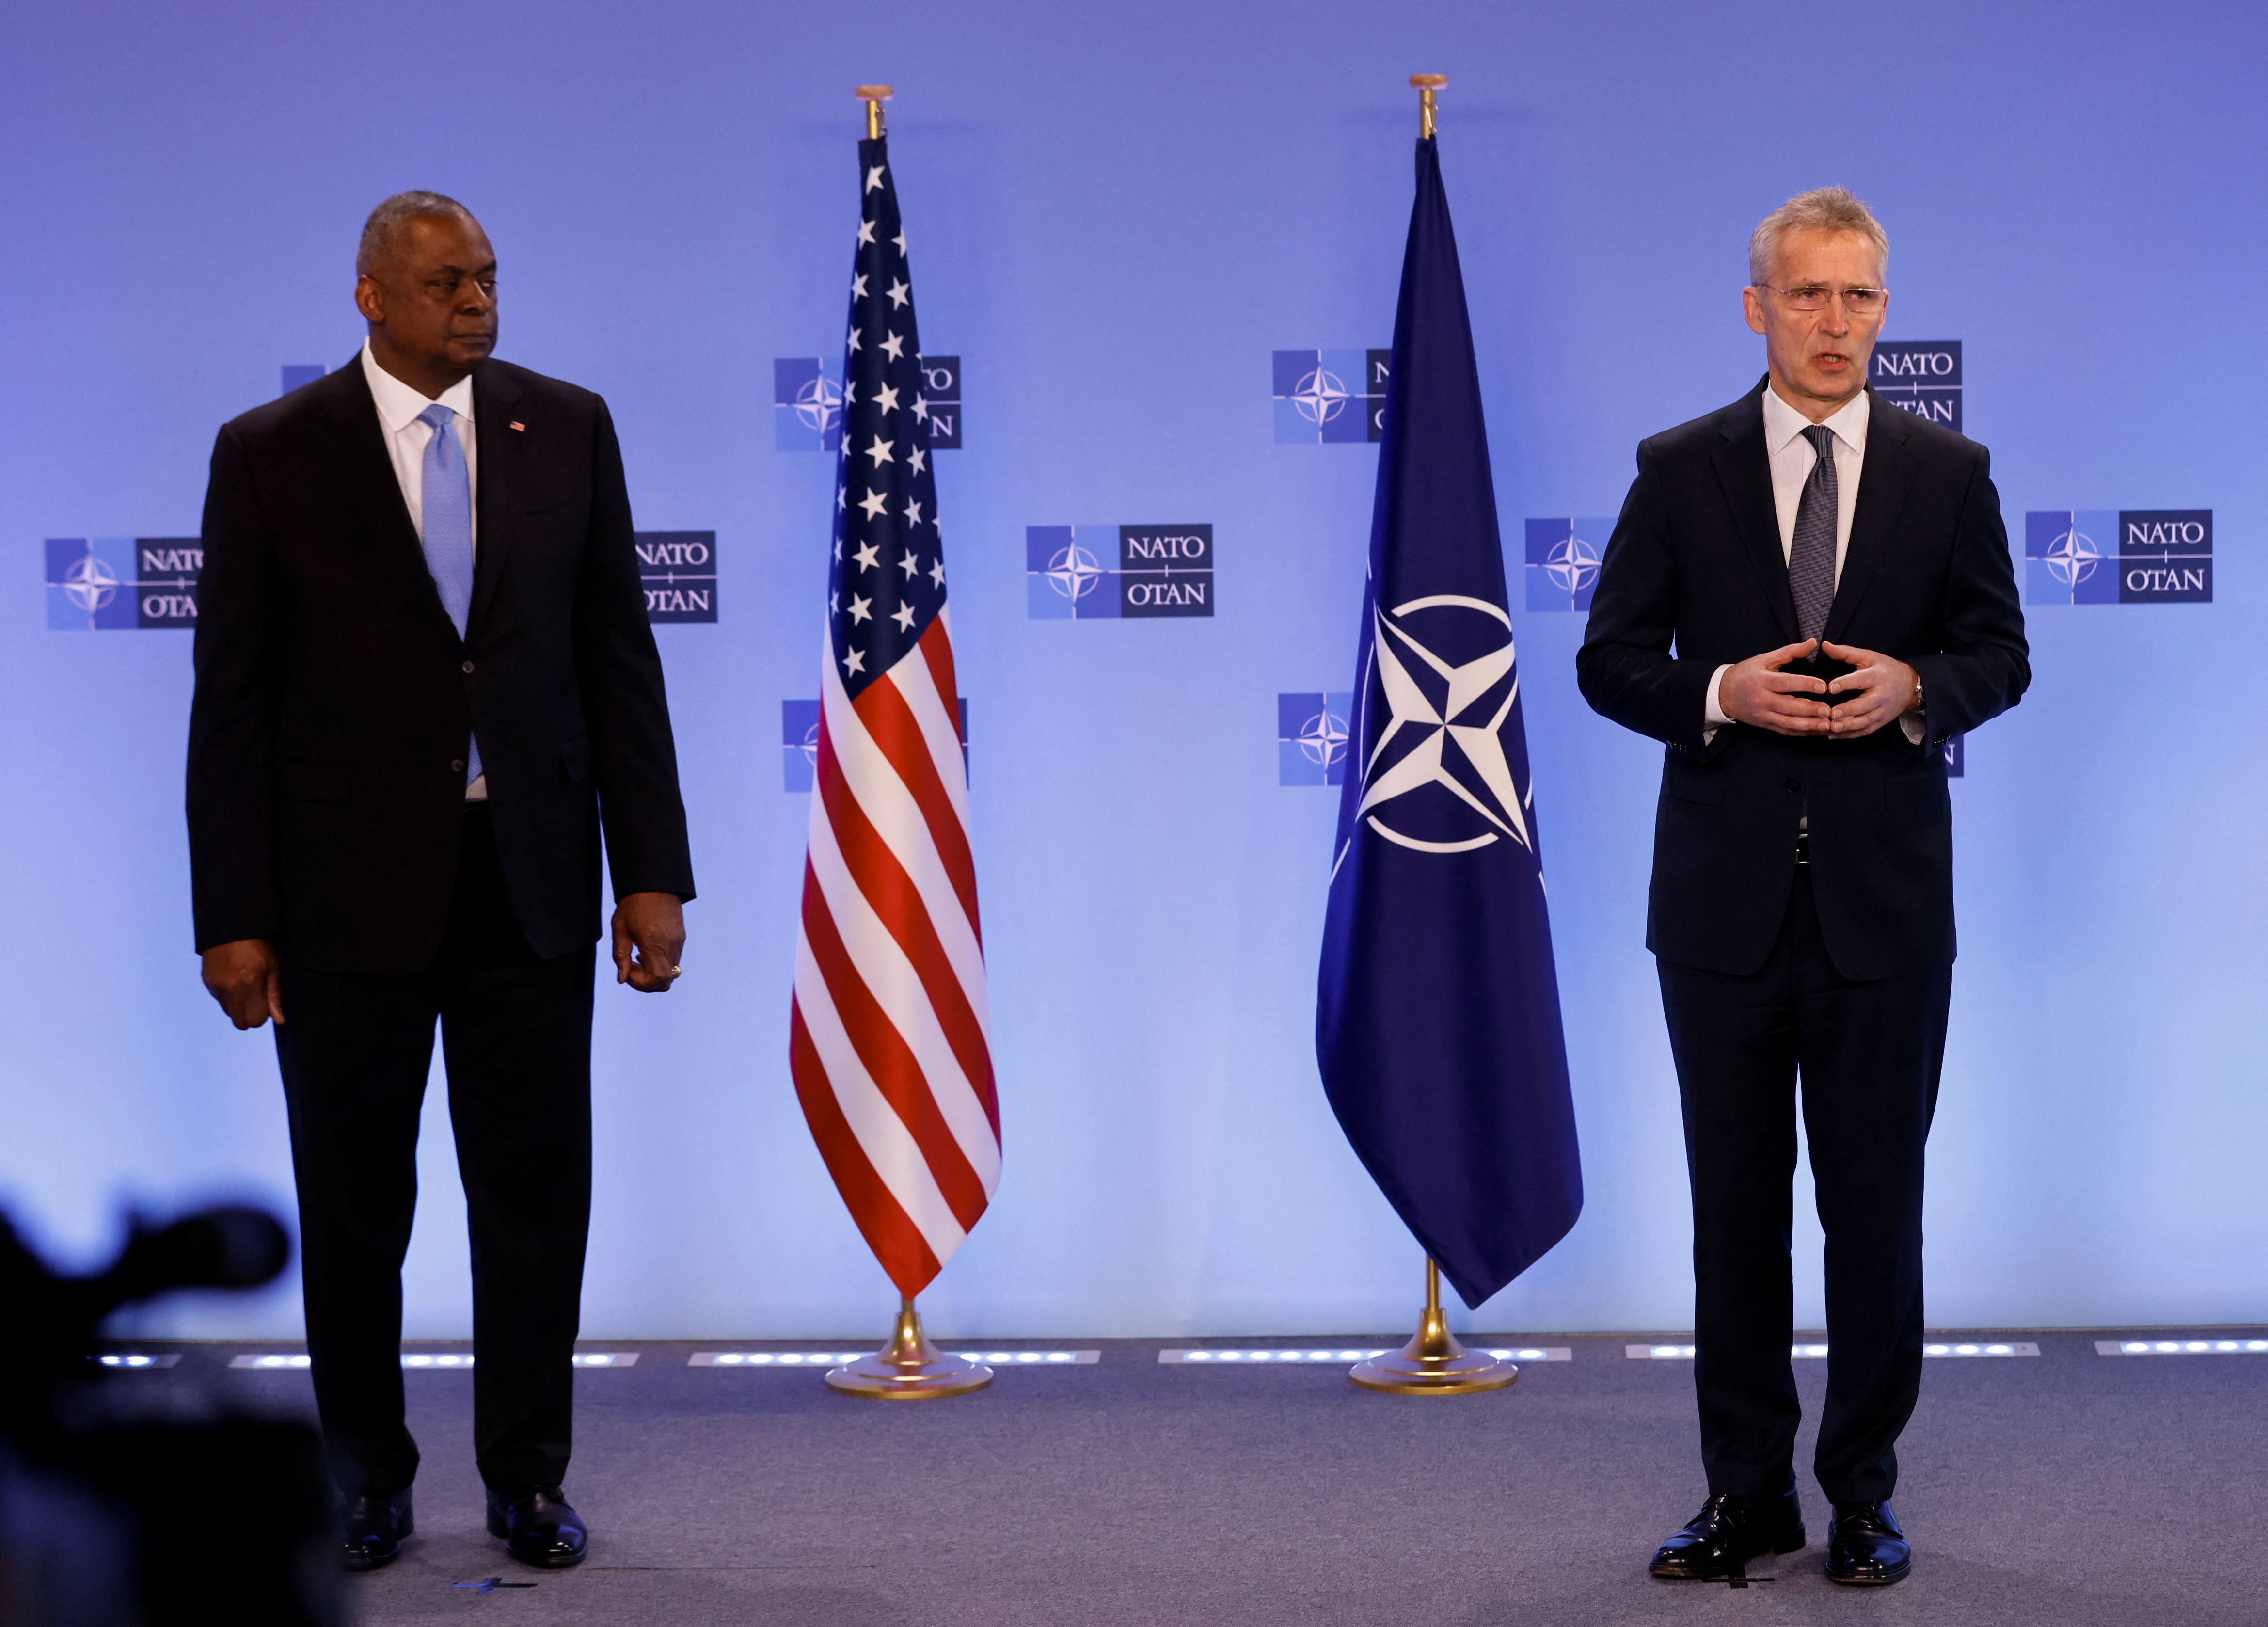 NATO Defence Ministers meeting in Brussels